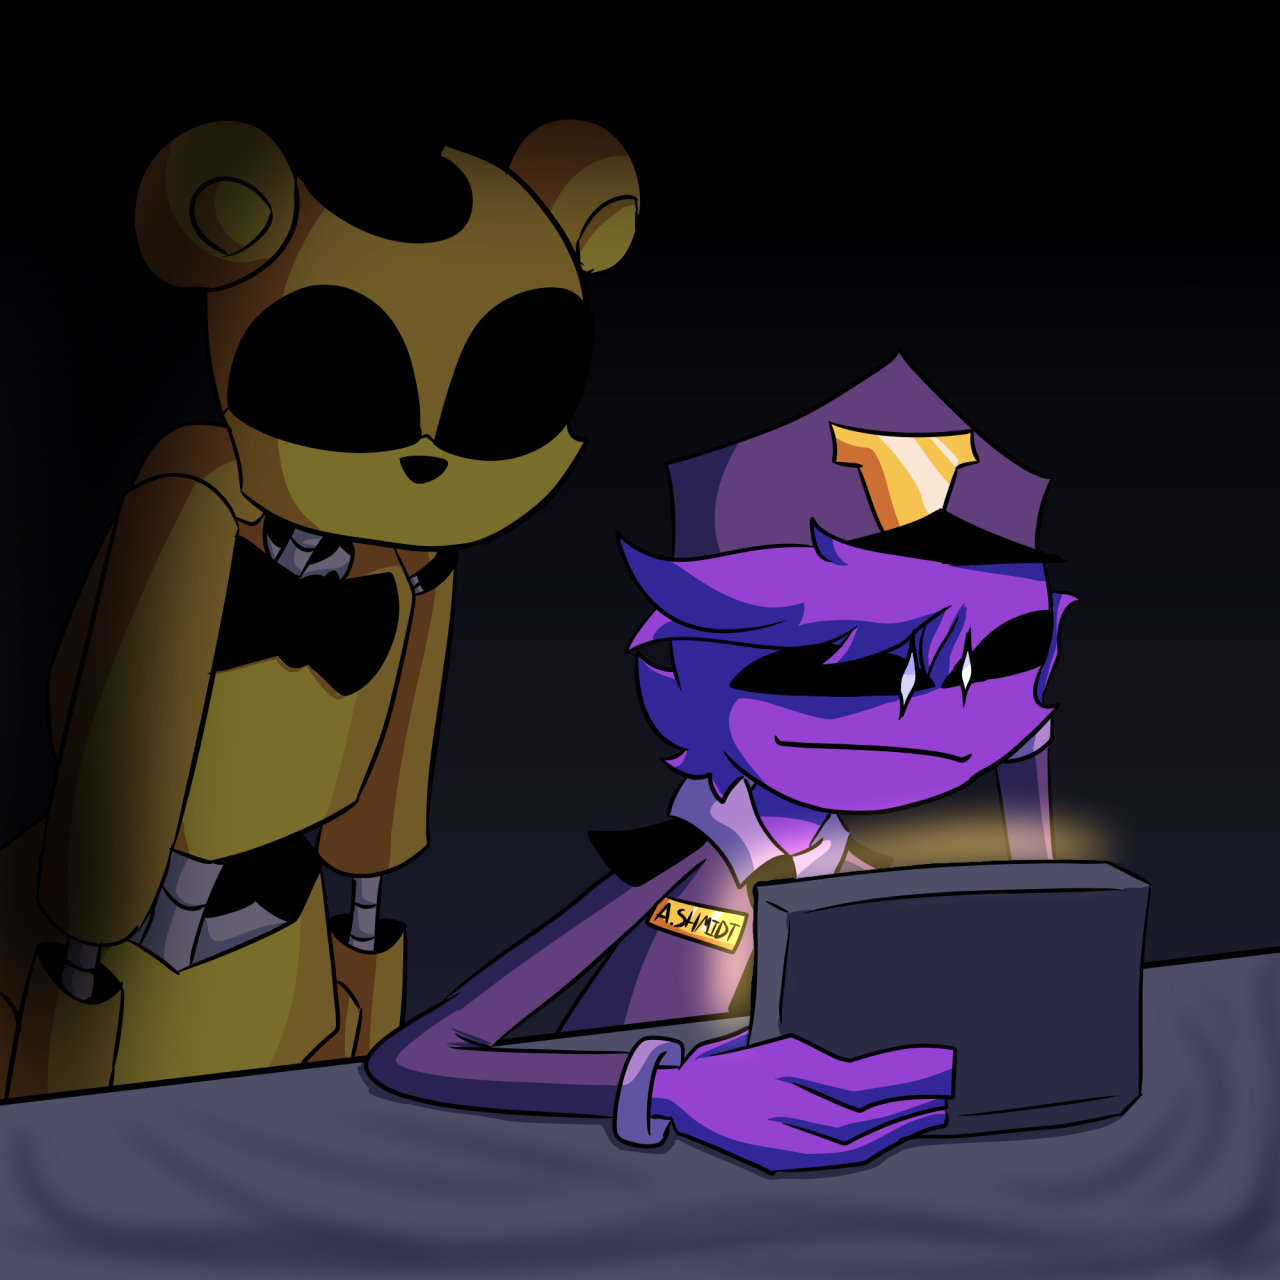 Im The Purple Guy [Instrumental] FNaF - Song Lyrics and Music by DAGames  arranged by ArkMasky on Smule Social Singing app